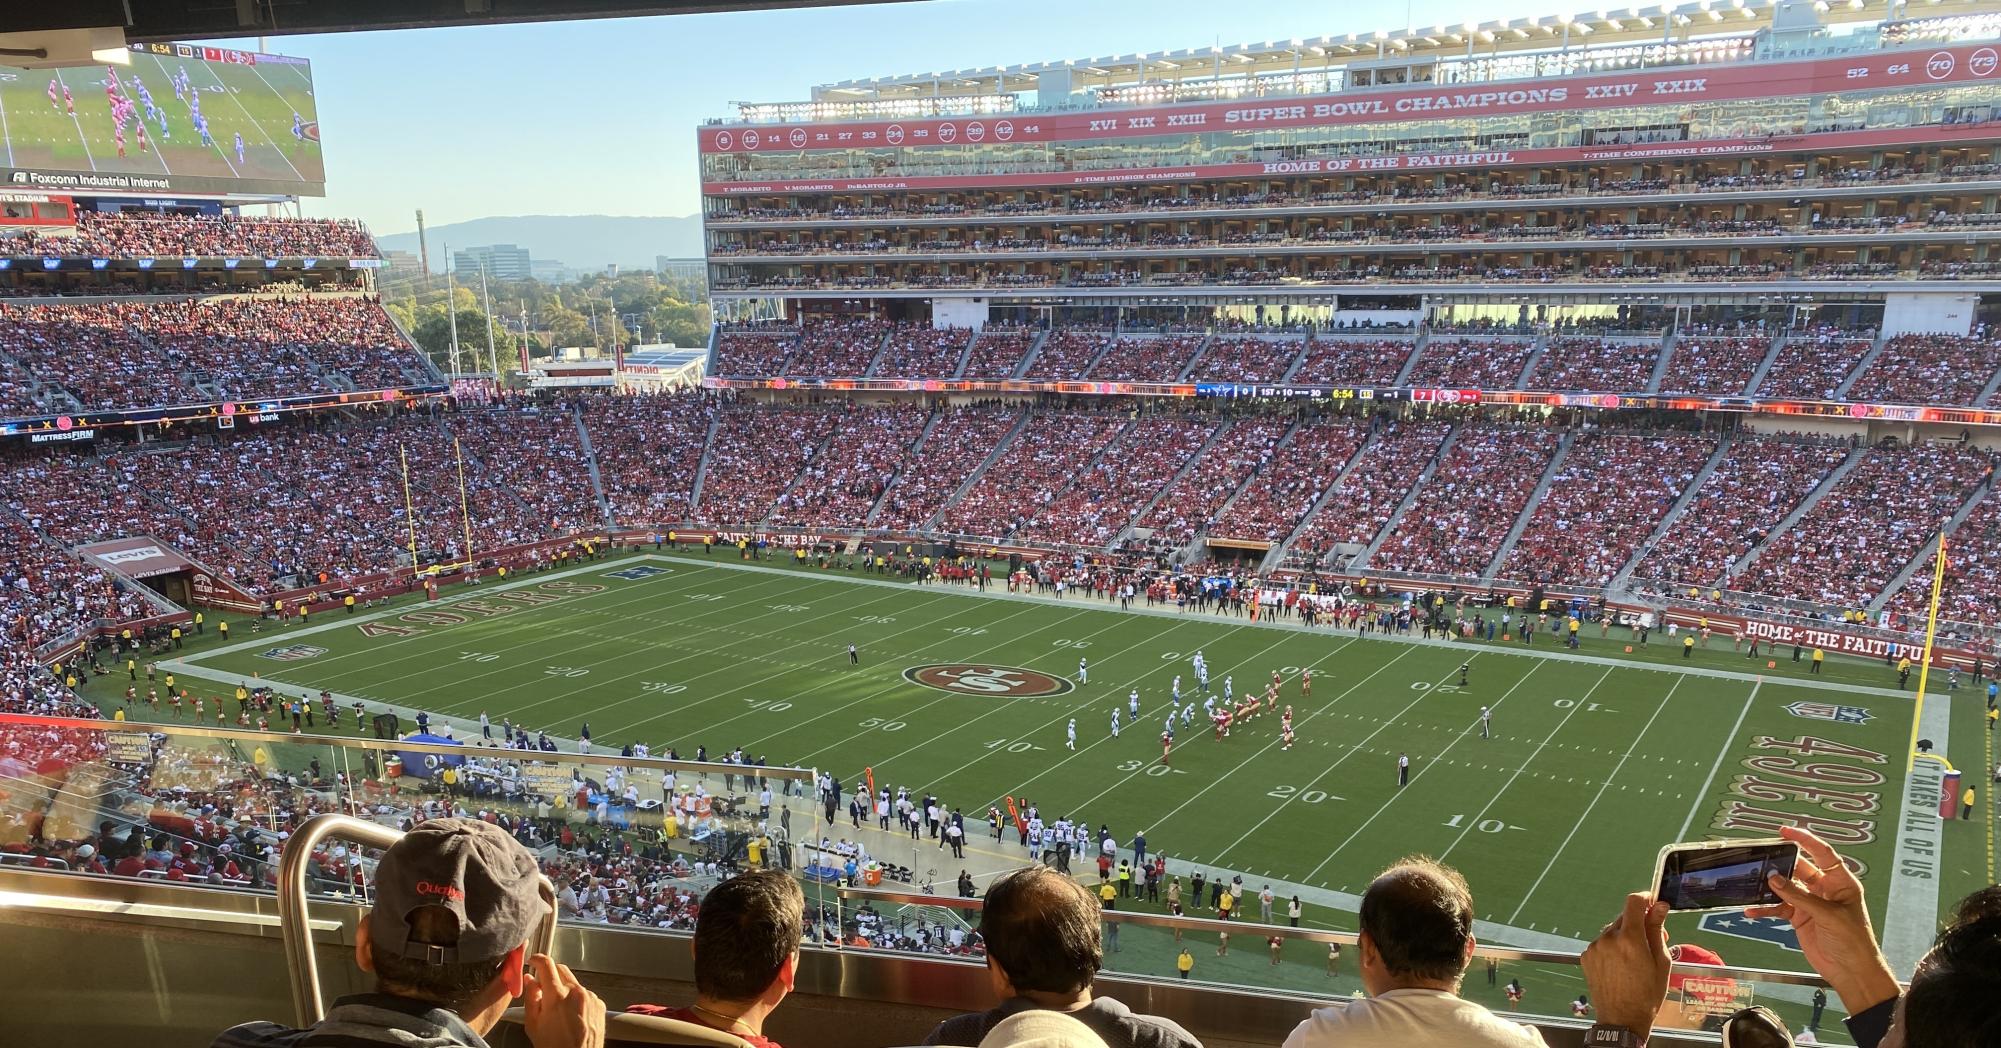 The San Francisco 49ers played the Dallas Cowboys at Levi’s Stadium on Sunday, Oct. 8. 